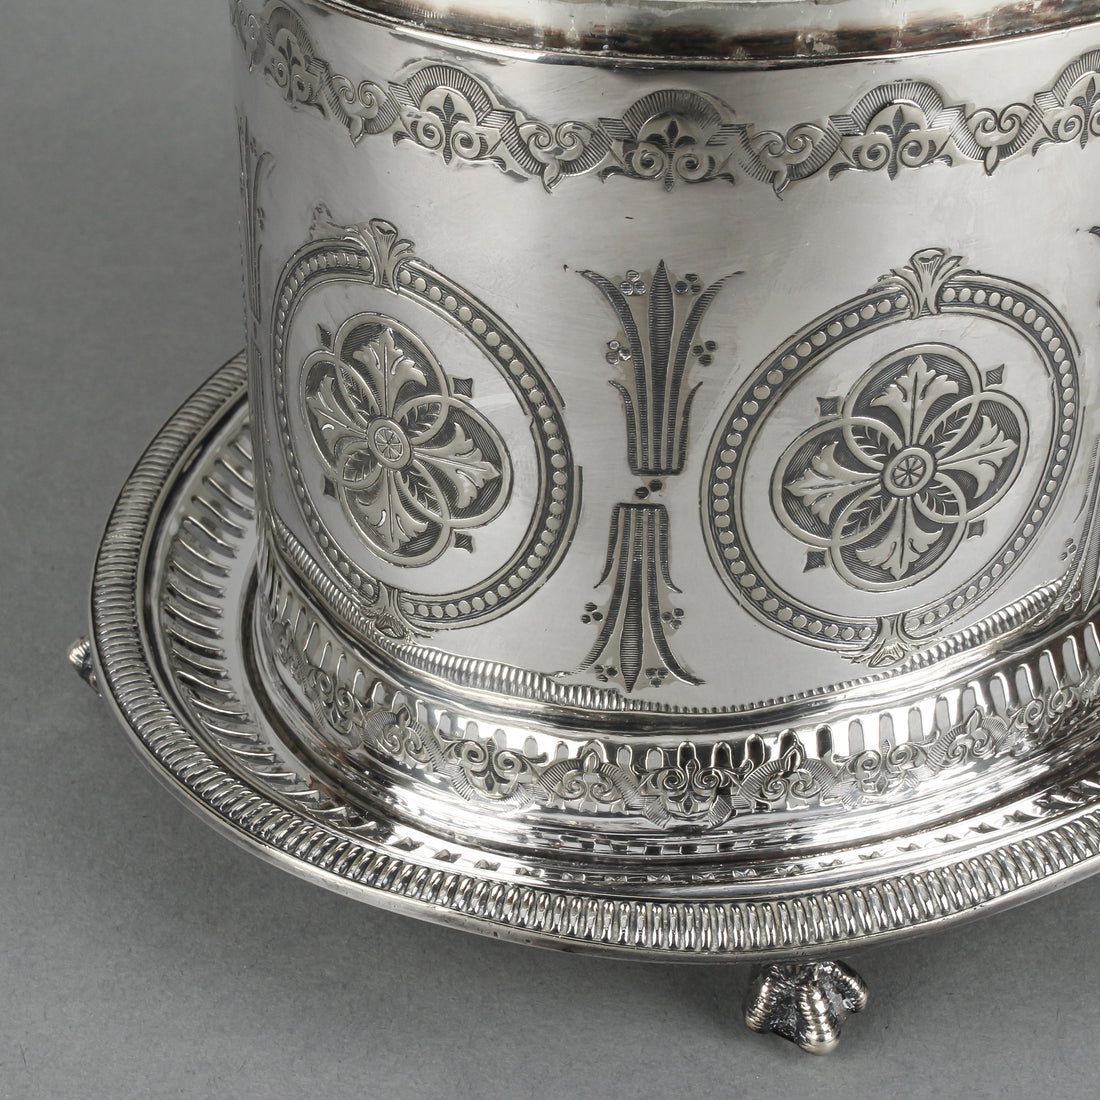 H. WILKINSON & CO. Silverplate Footed Biscuit Box